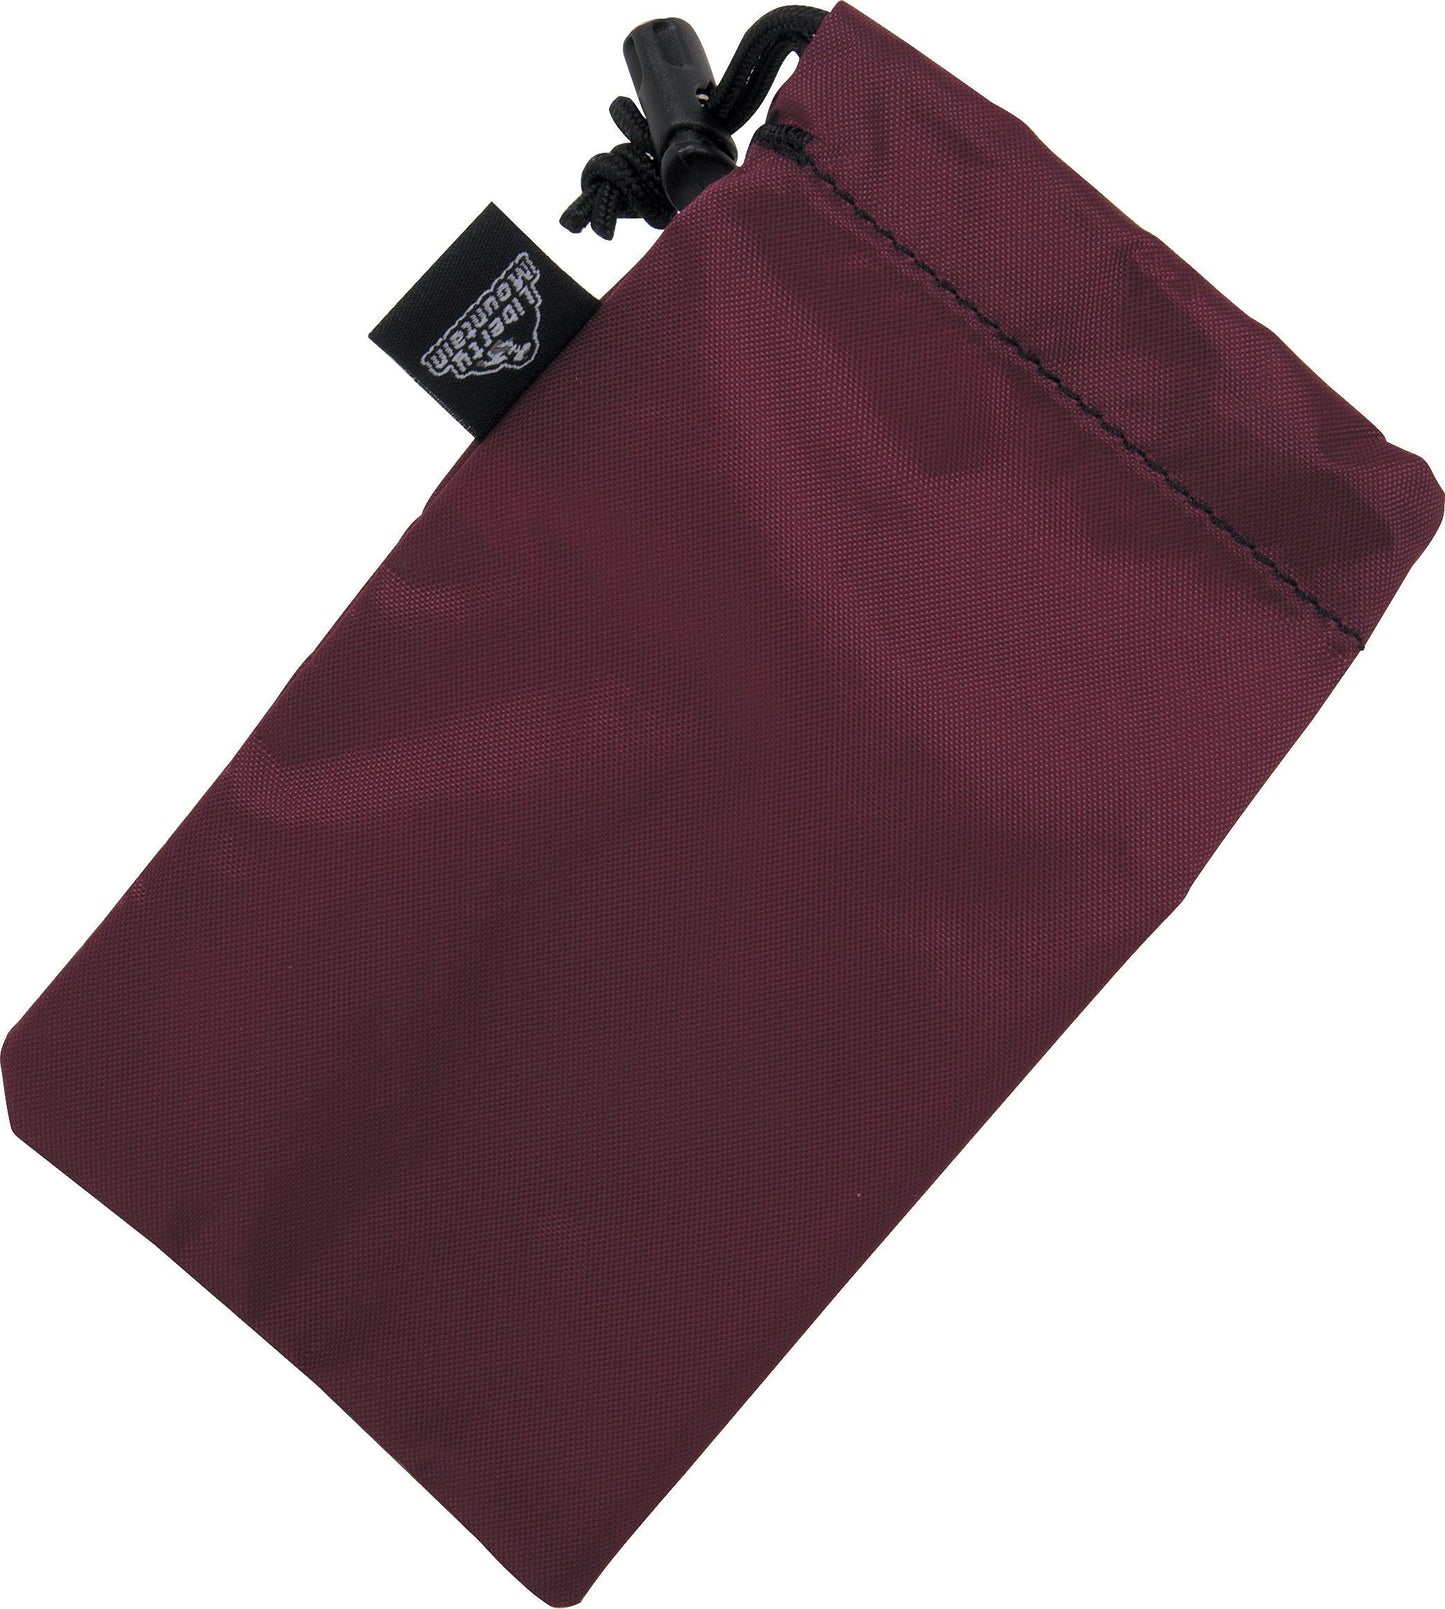 LIBERTY MOUNTAIN DITTY BAGS